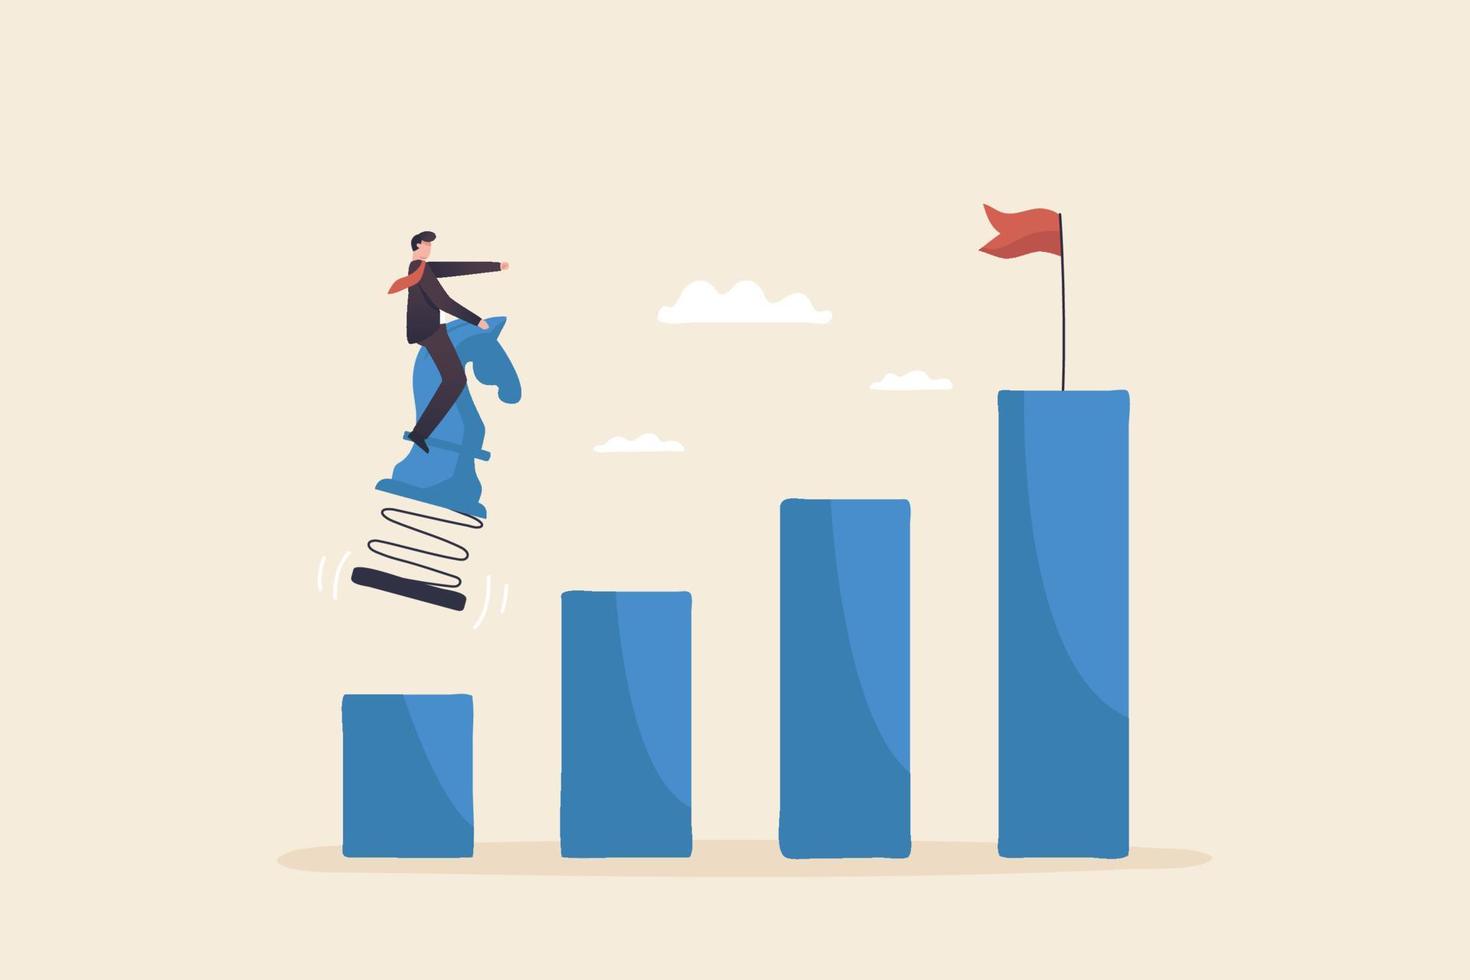 process of success, business goals, promotion to a higher level or business growth. Businessman riding chess jumps to the goal or flag atop the graph. vector